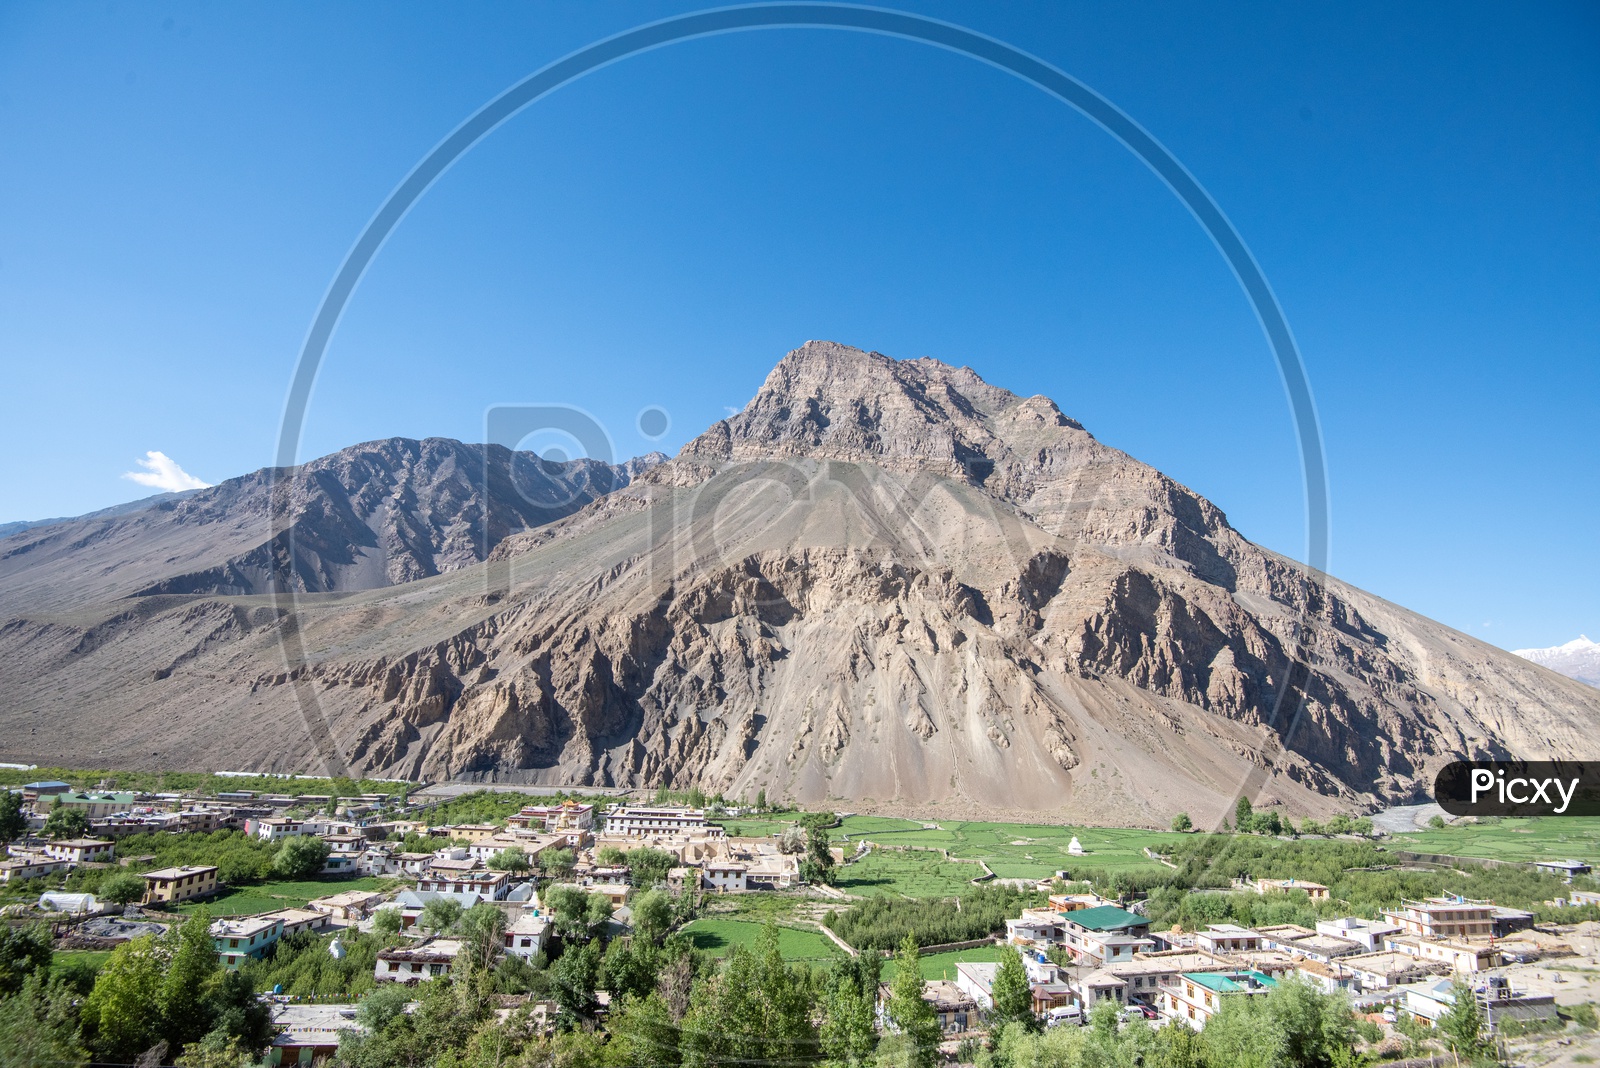 Landscape Of a Village And Sand Hills In Leh